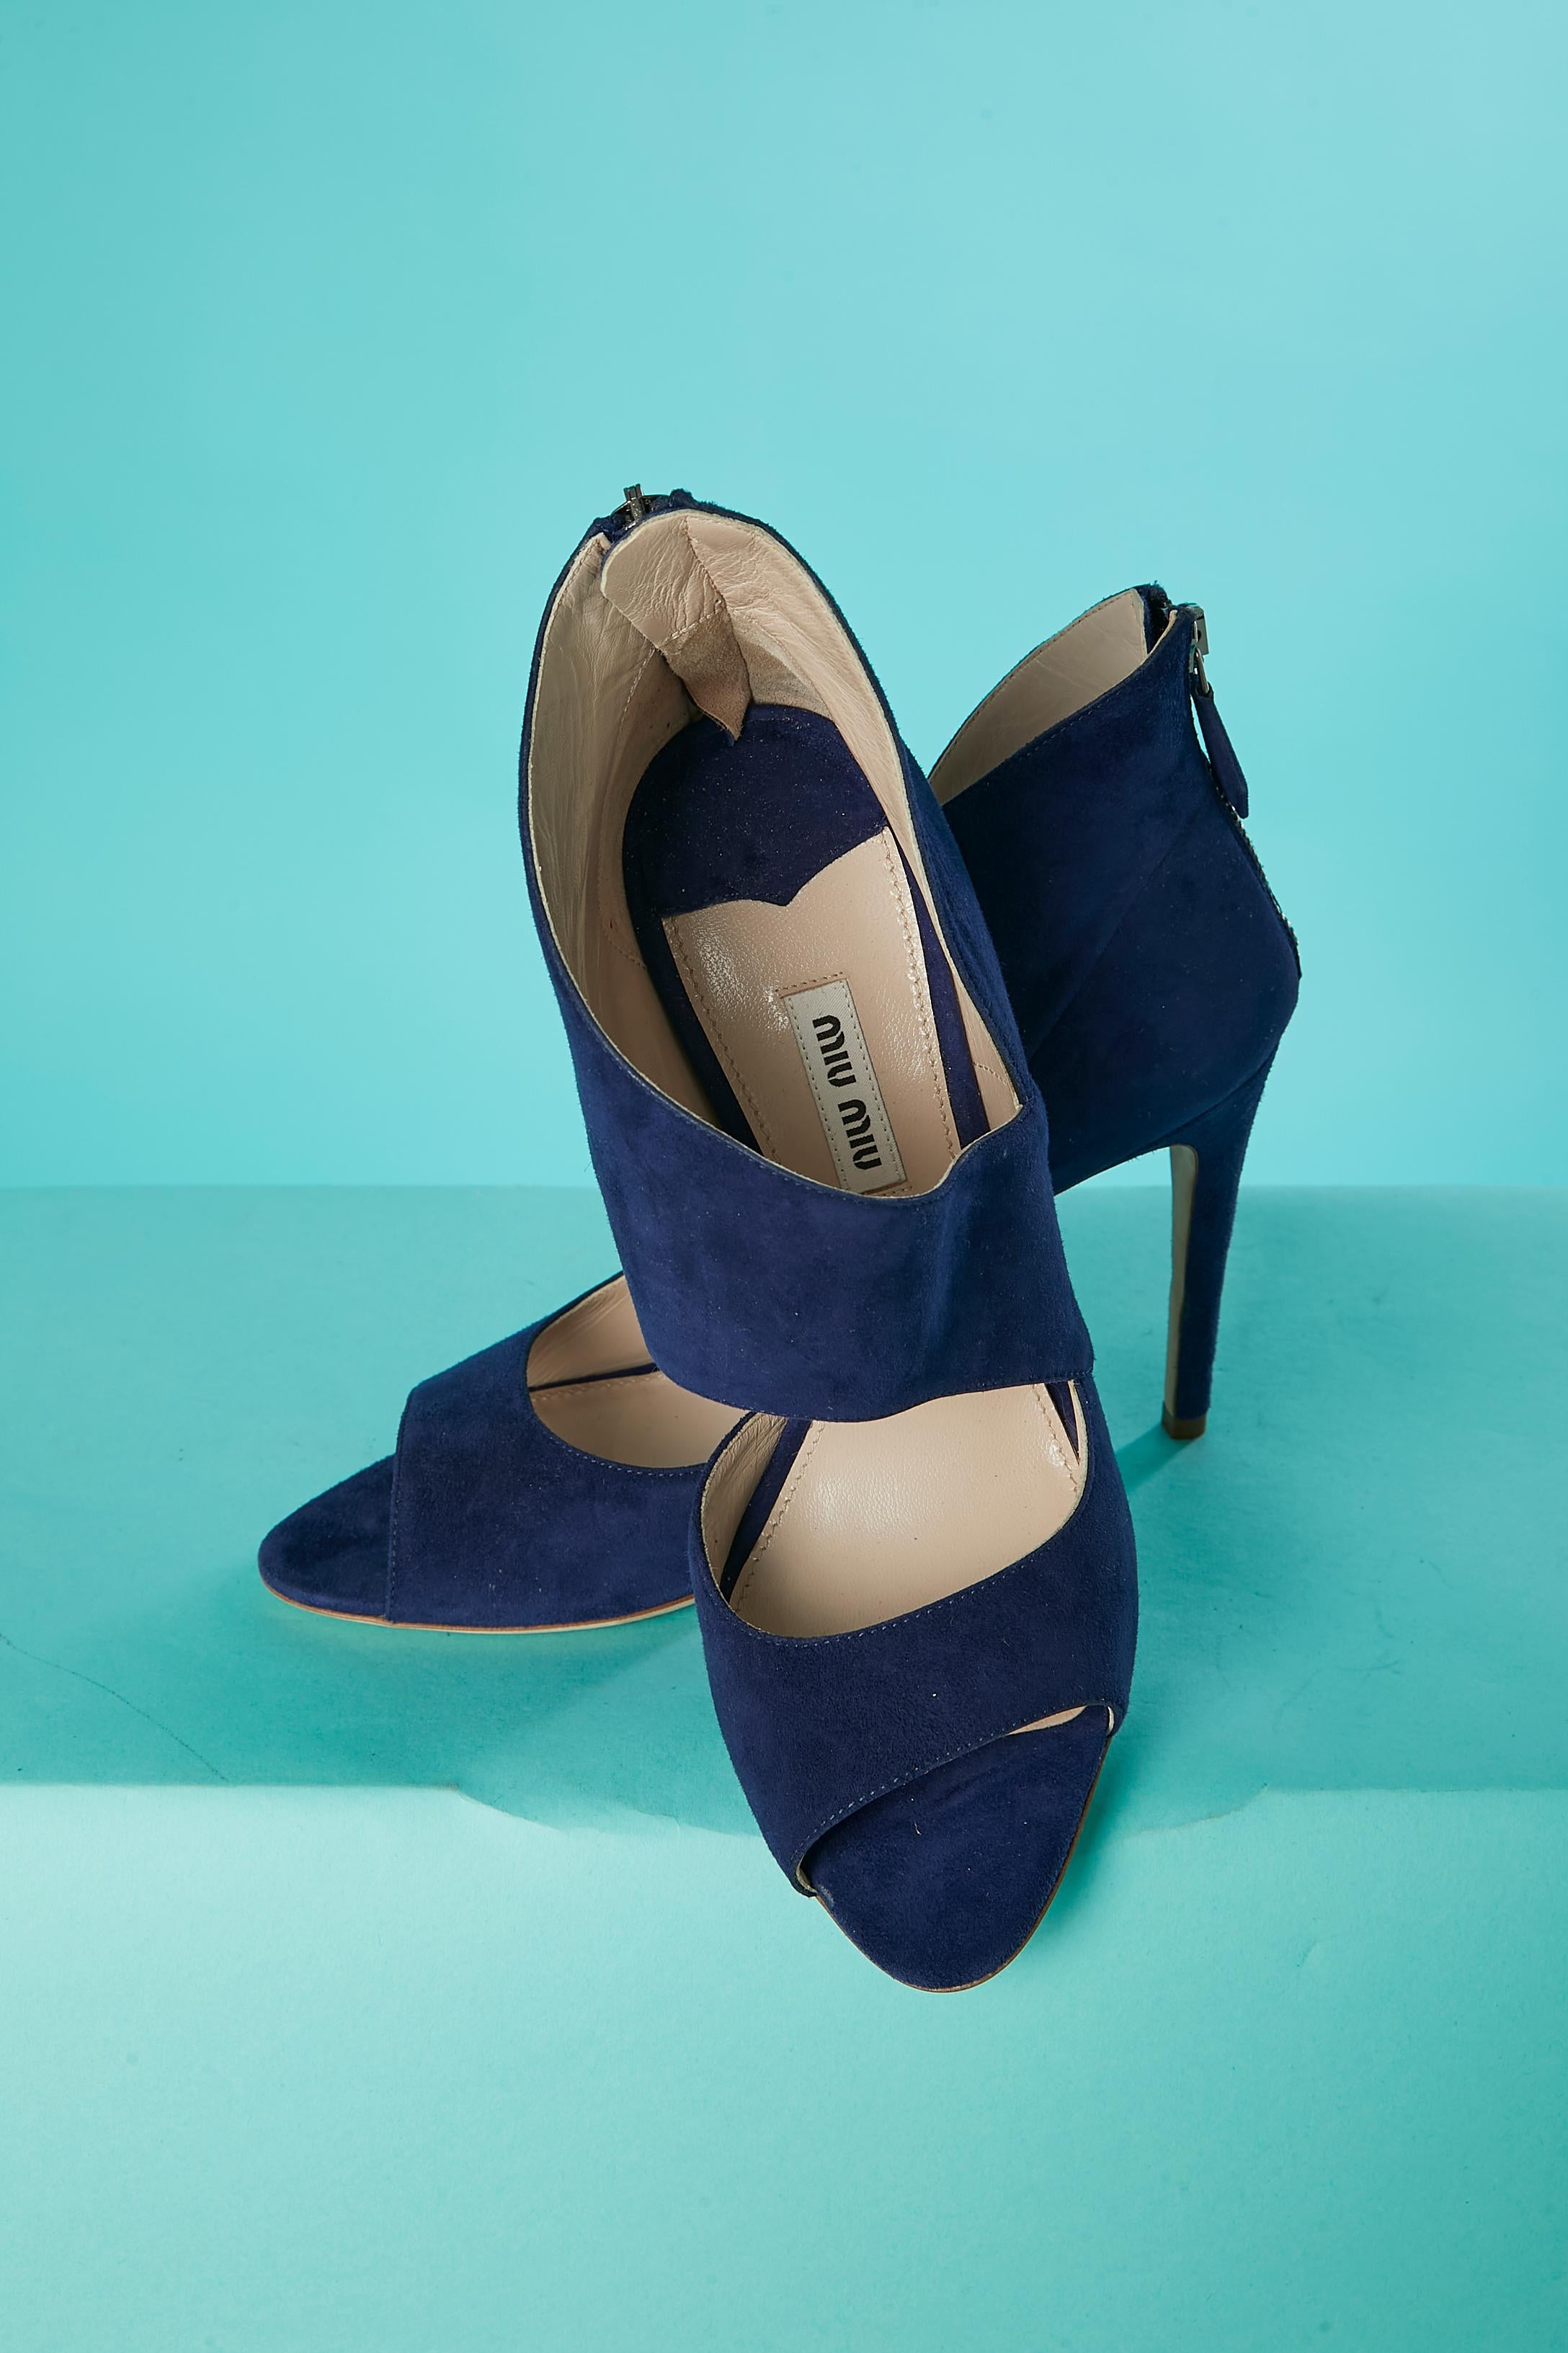 Blue suede open-toe sandals with zip in the top back Miu-Miu  In Excellent Condition For Sale In Saint-Ouen-Sur-Seine, FR